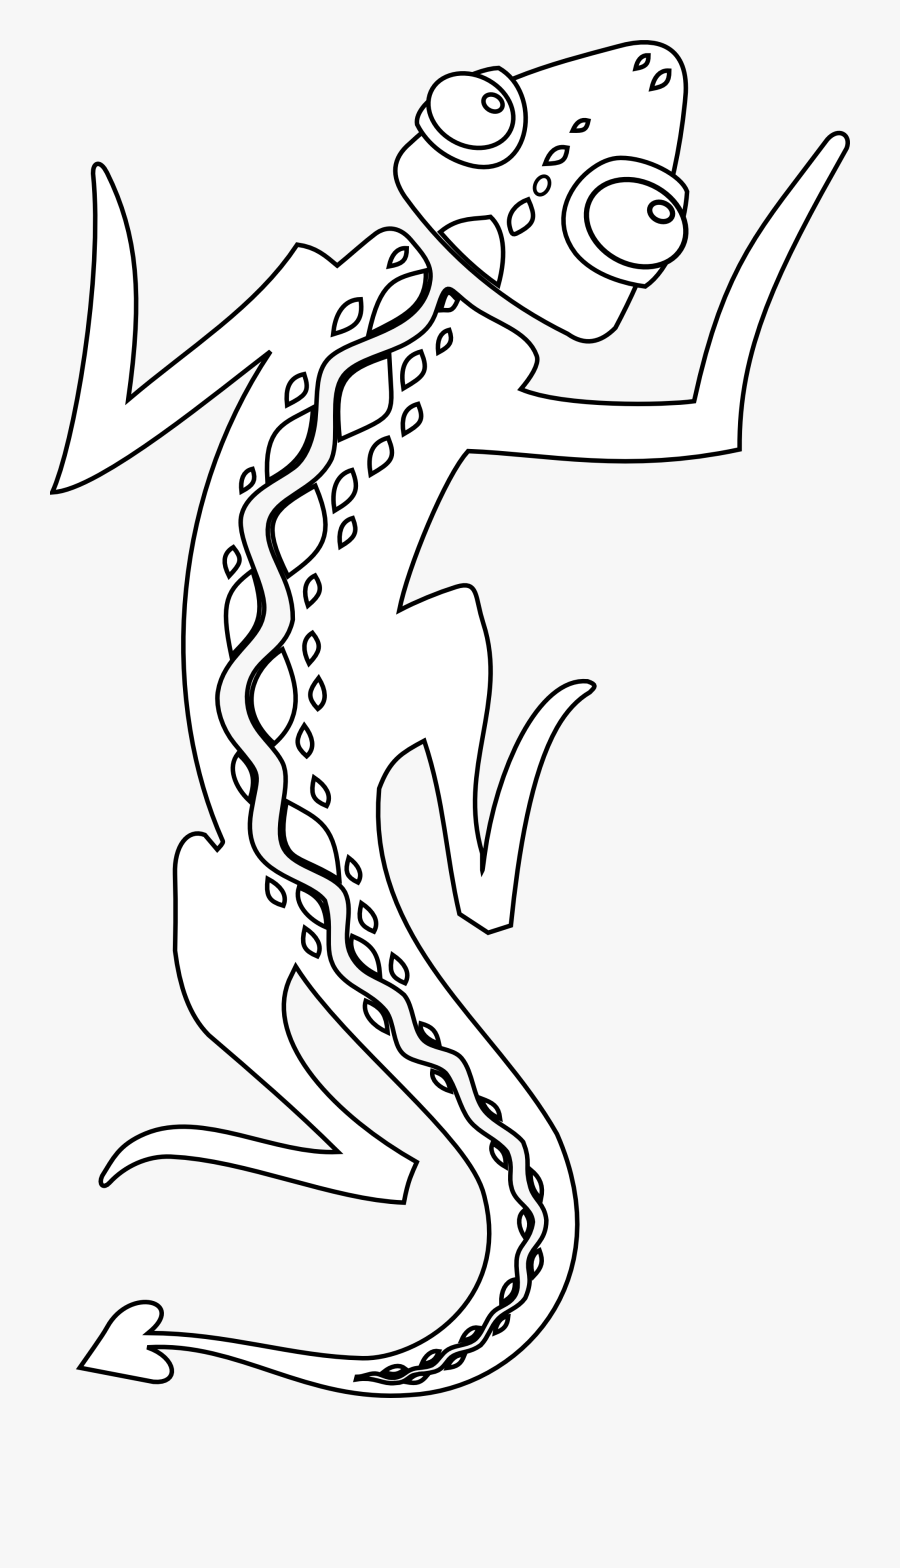 Clipart Free Download Lizard Coloring Pages Coloringsuite - Lizard Png For Coloring, Transparent Clipart